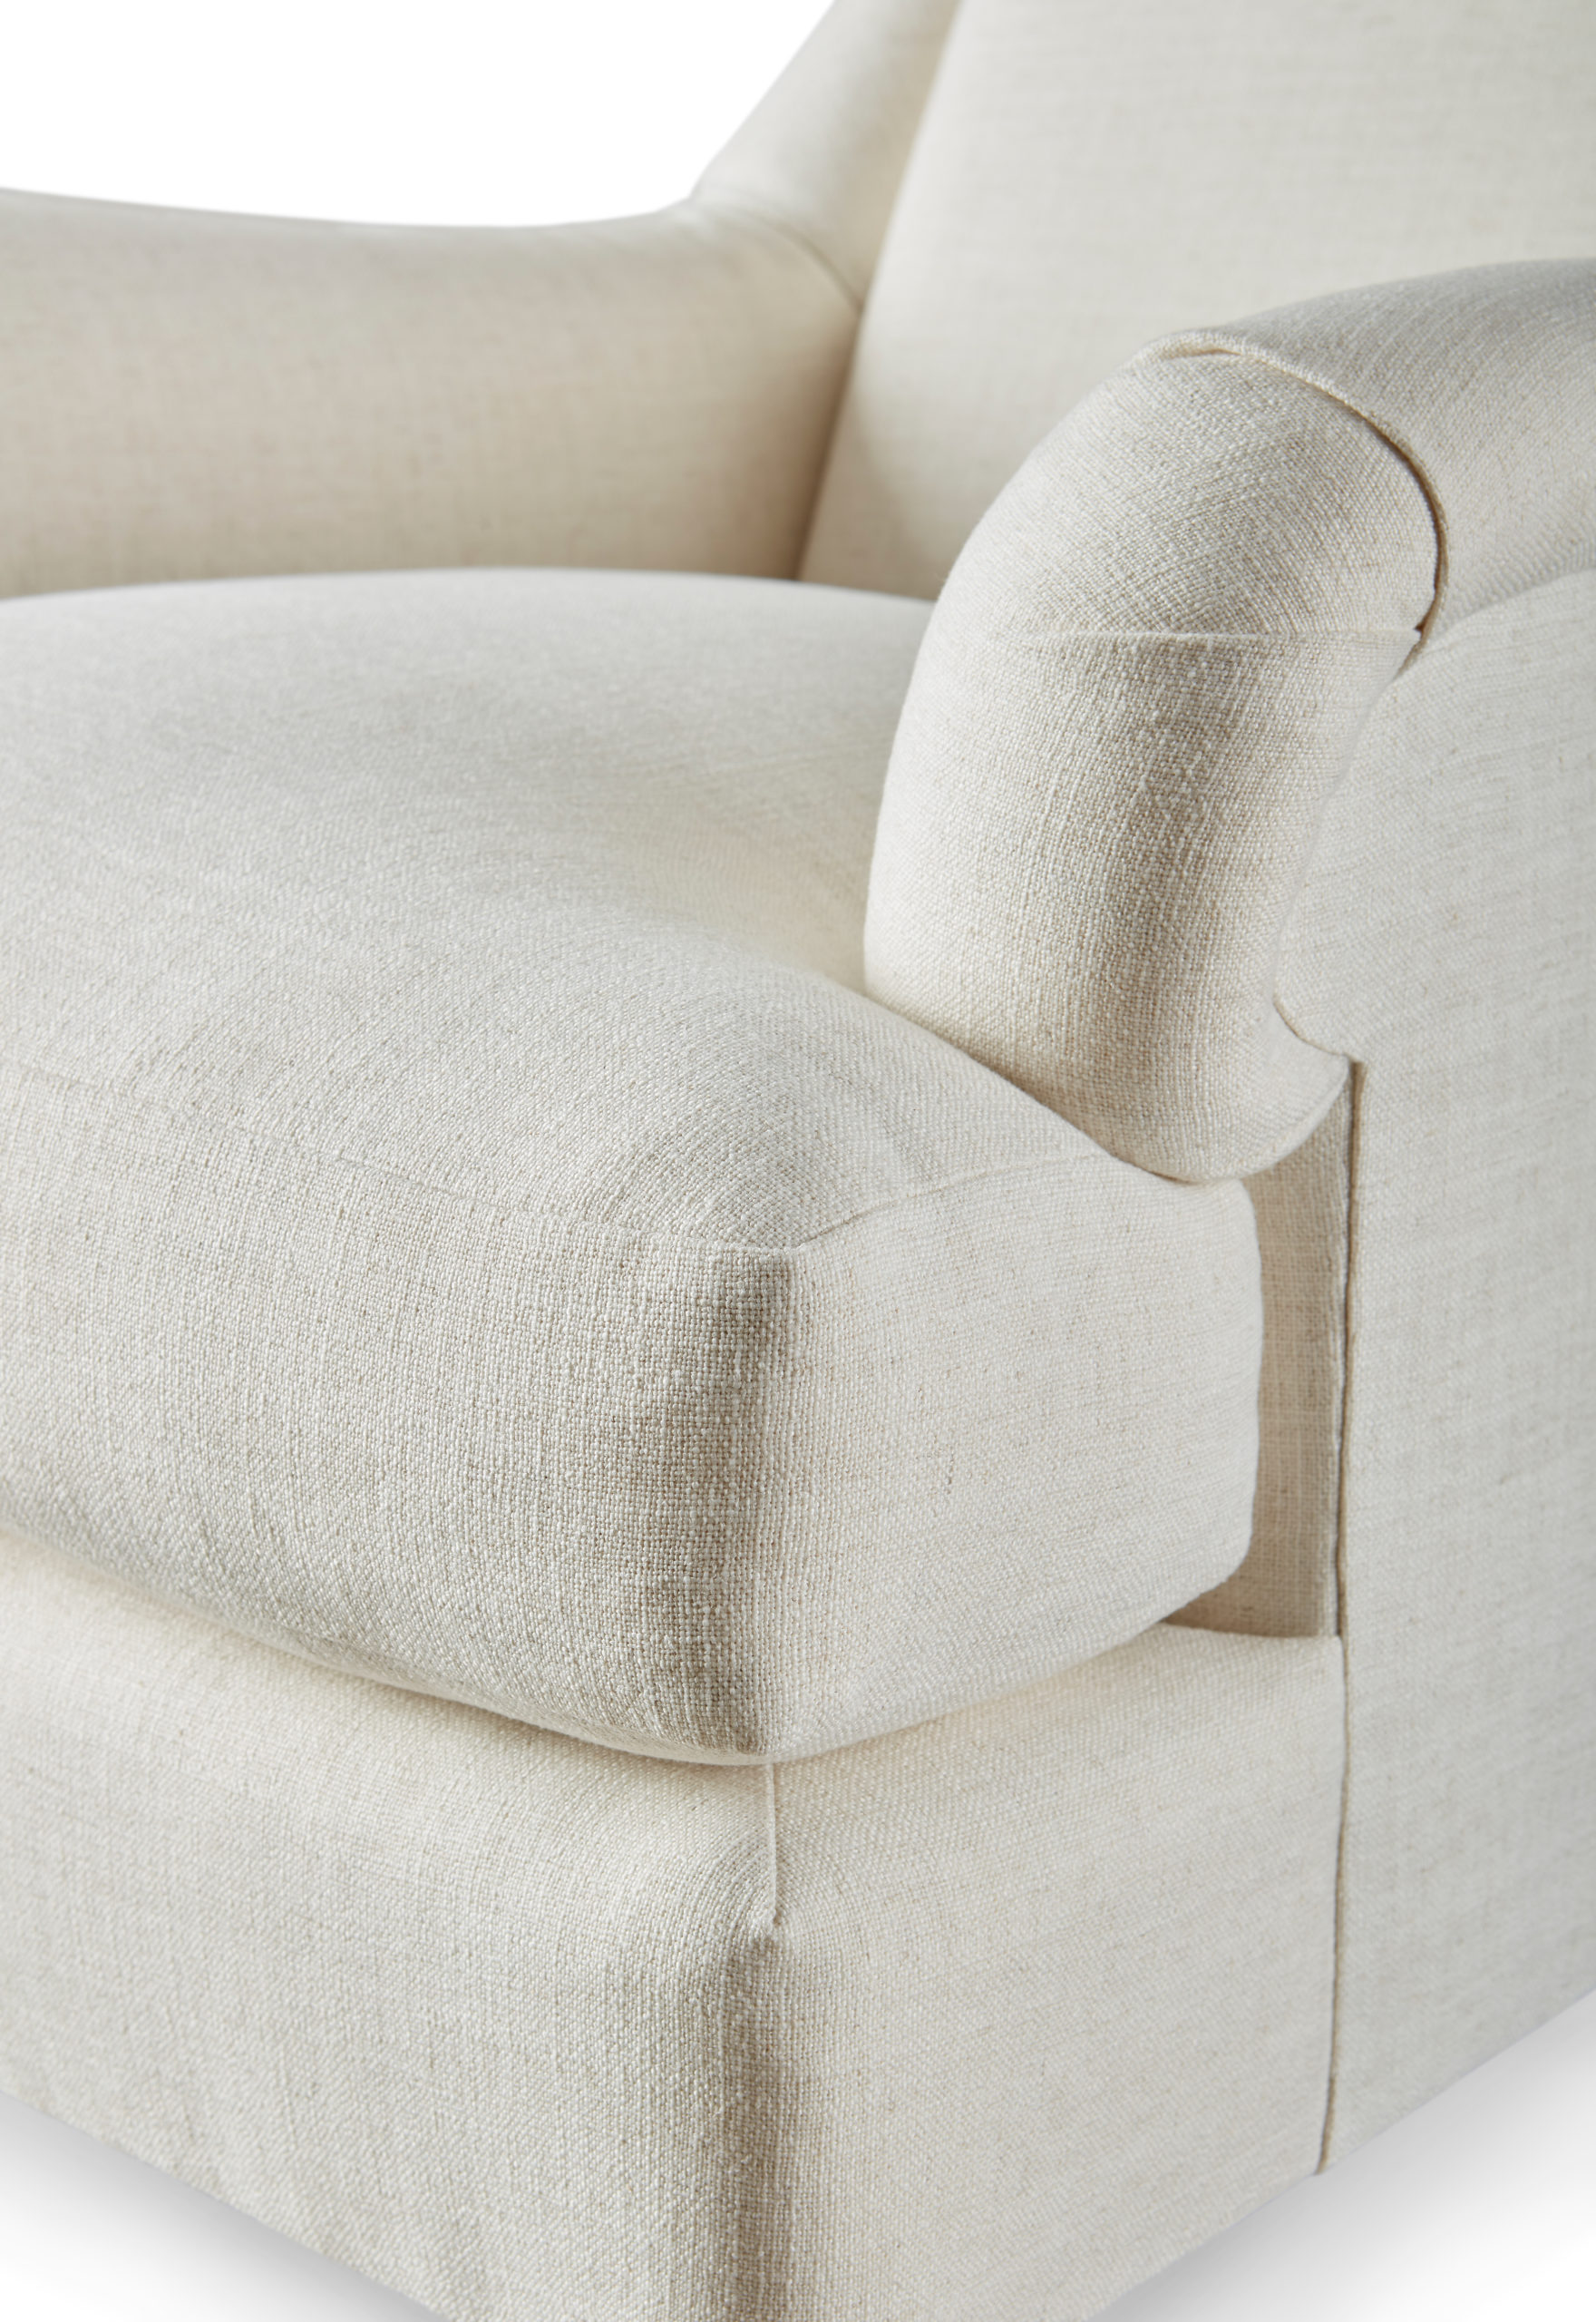 Baker_products_WNWN_derby_lounge_chair_BAU3112c_DETAIL-scaled-1